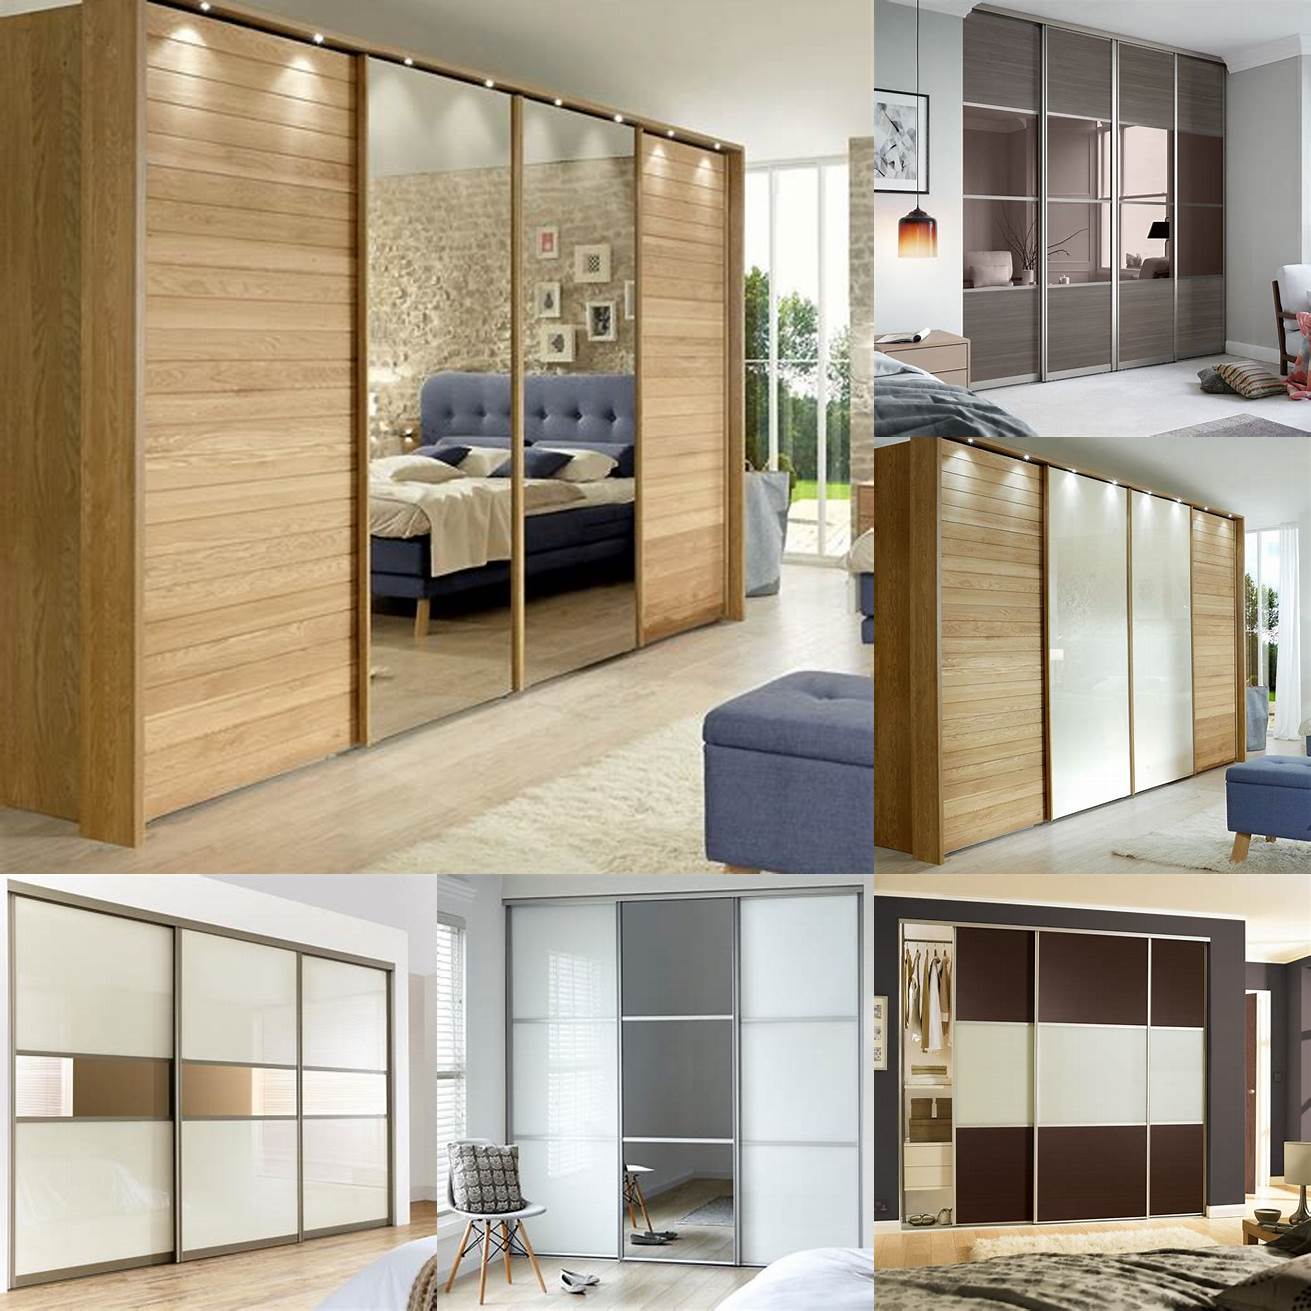 Image of a modern wardrobe with sliding doors